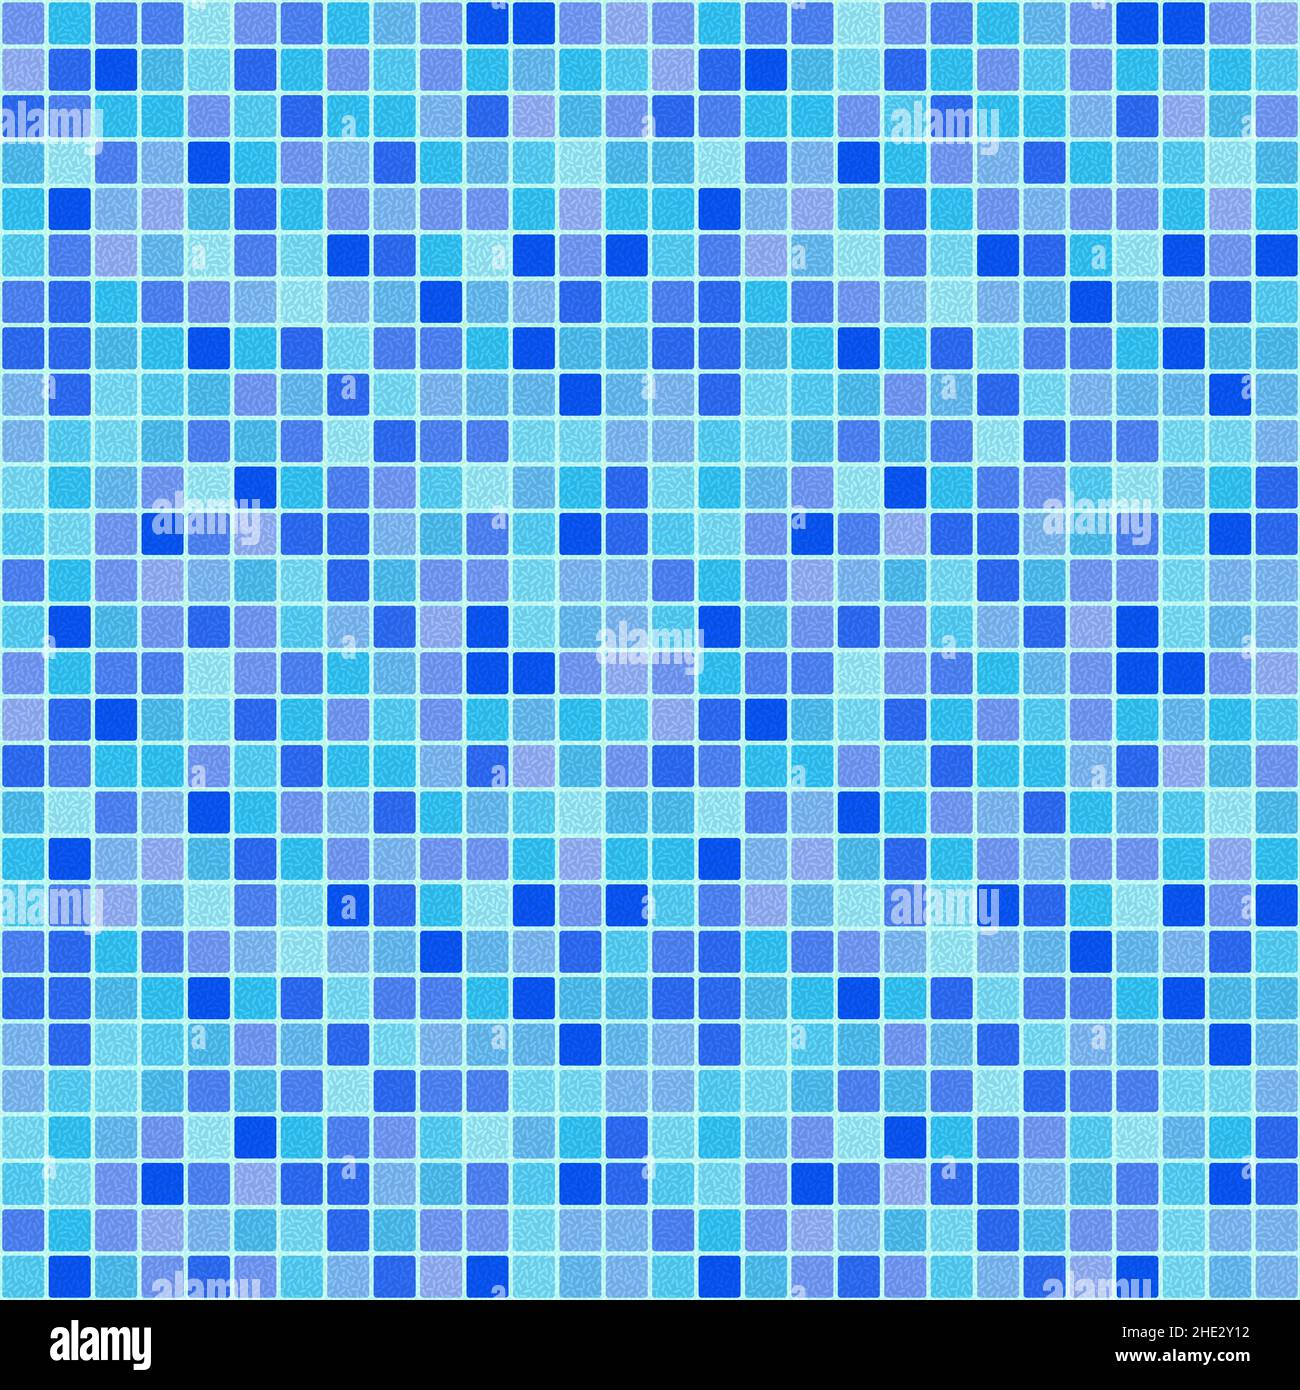 Seamless repeat pattern. Pool tiles i various colors of blue and green. Stock Vector